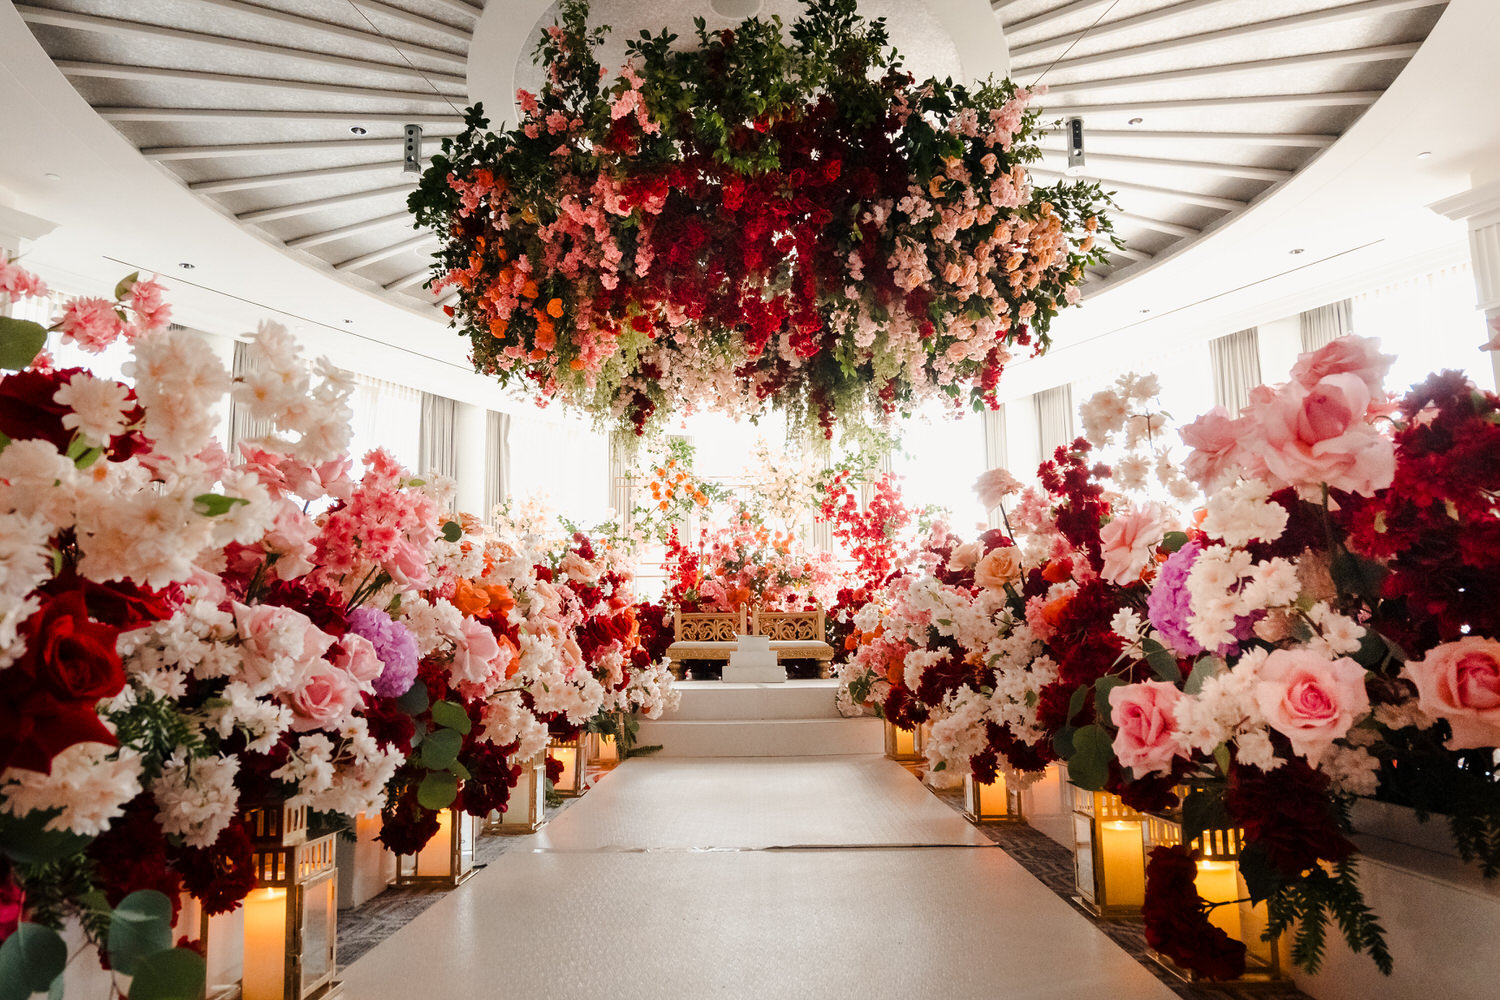 A wedding ceremony with flowers hanging from the ceiling.